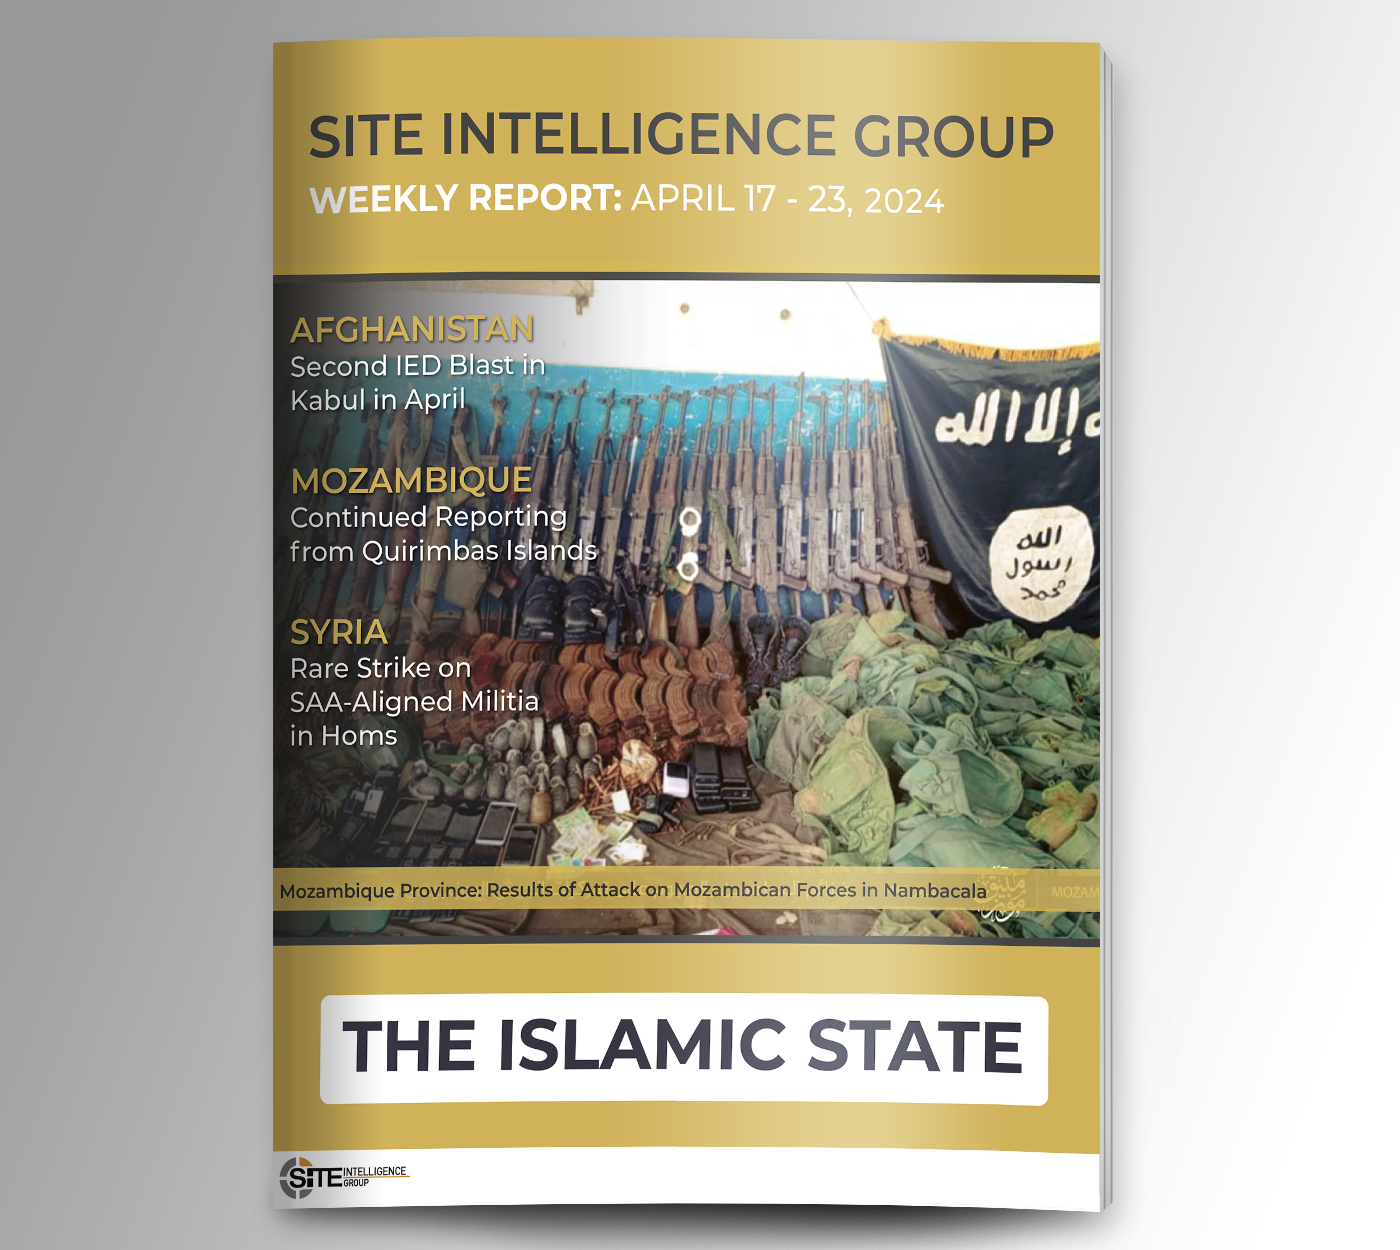 Weekly inSITE on the Islamic State for April 17-23, 2024